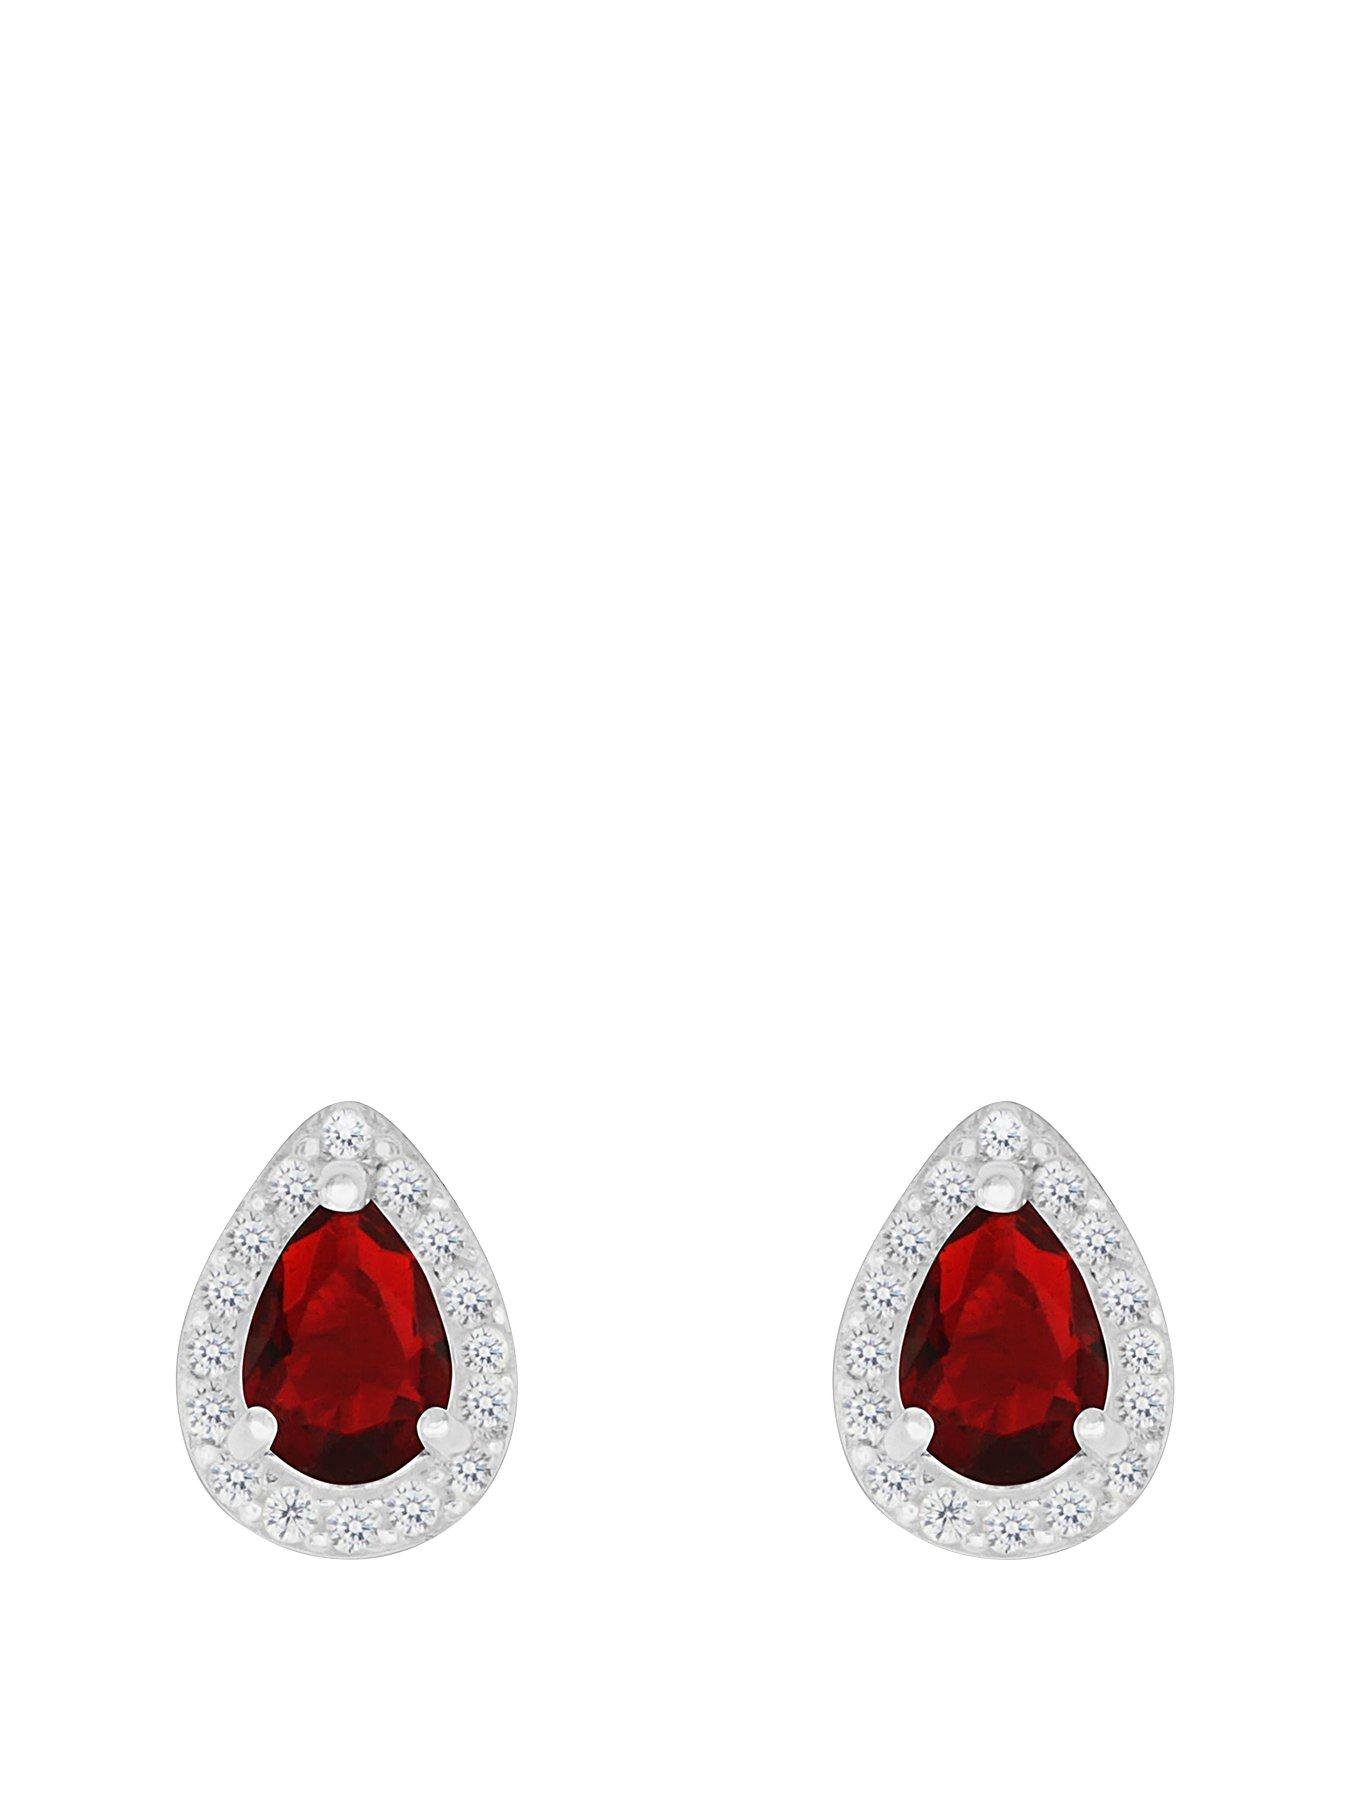 Women Sterling Silver Red and White Cubic Zirconia Peardrop Stud Earrings